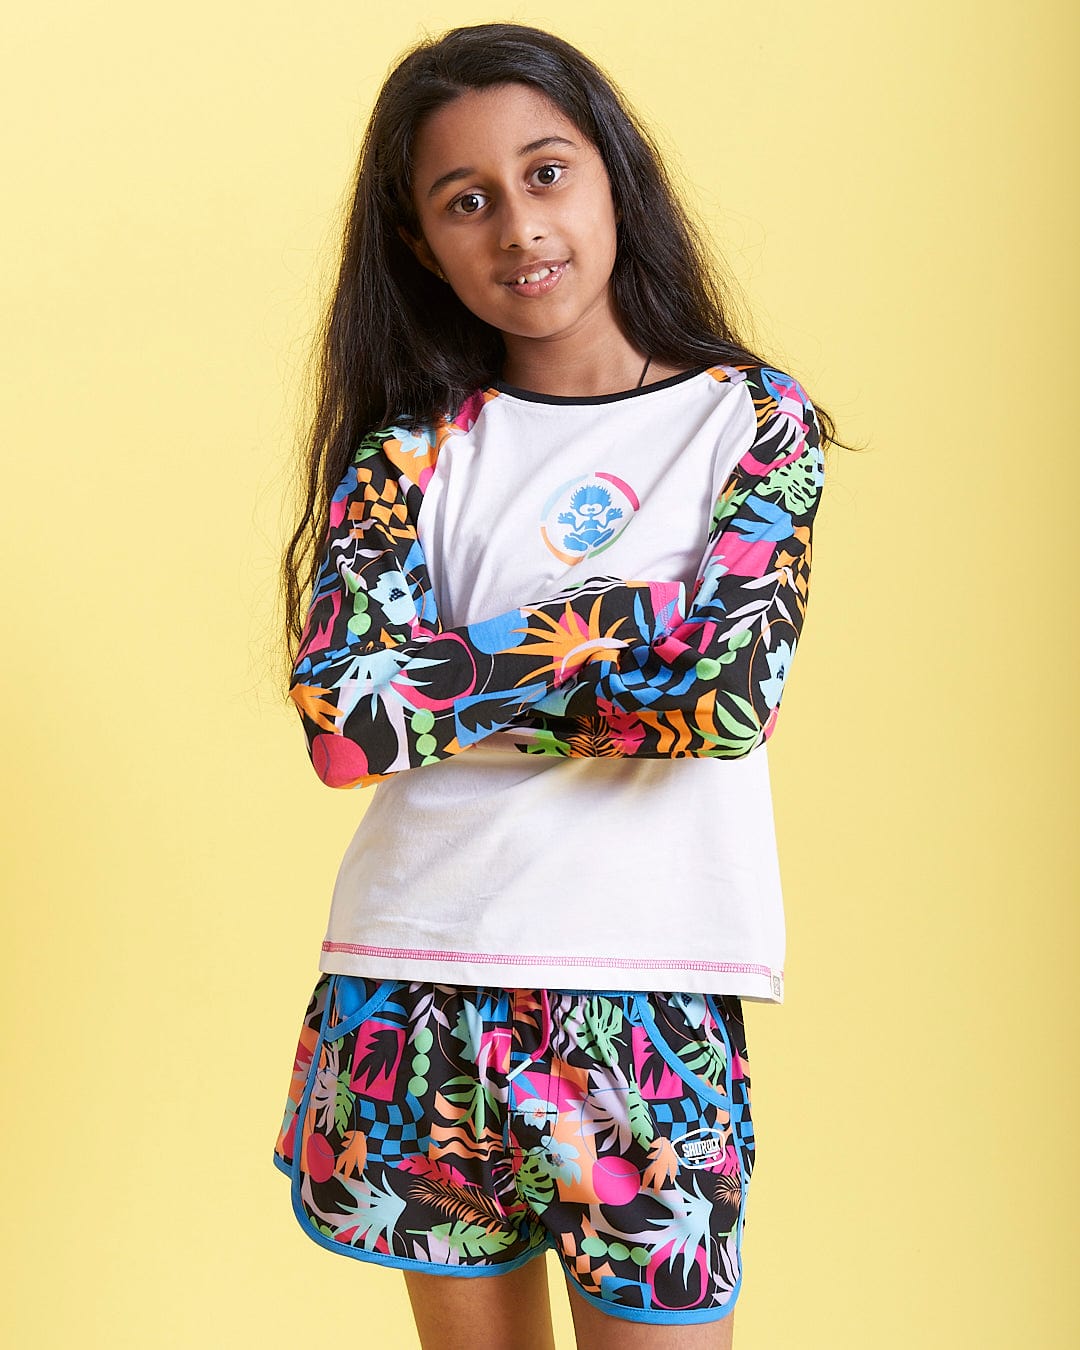 A young girl wearing a long - sleeved t - shirt and Saltrock Zephyr - Kids Boardshort - Blue.